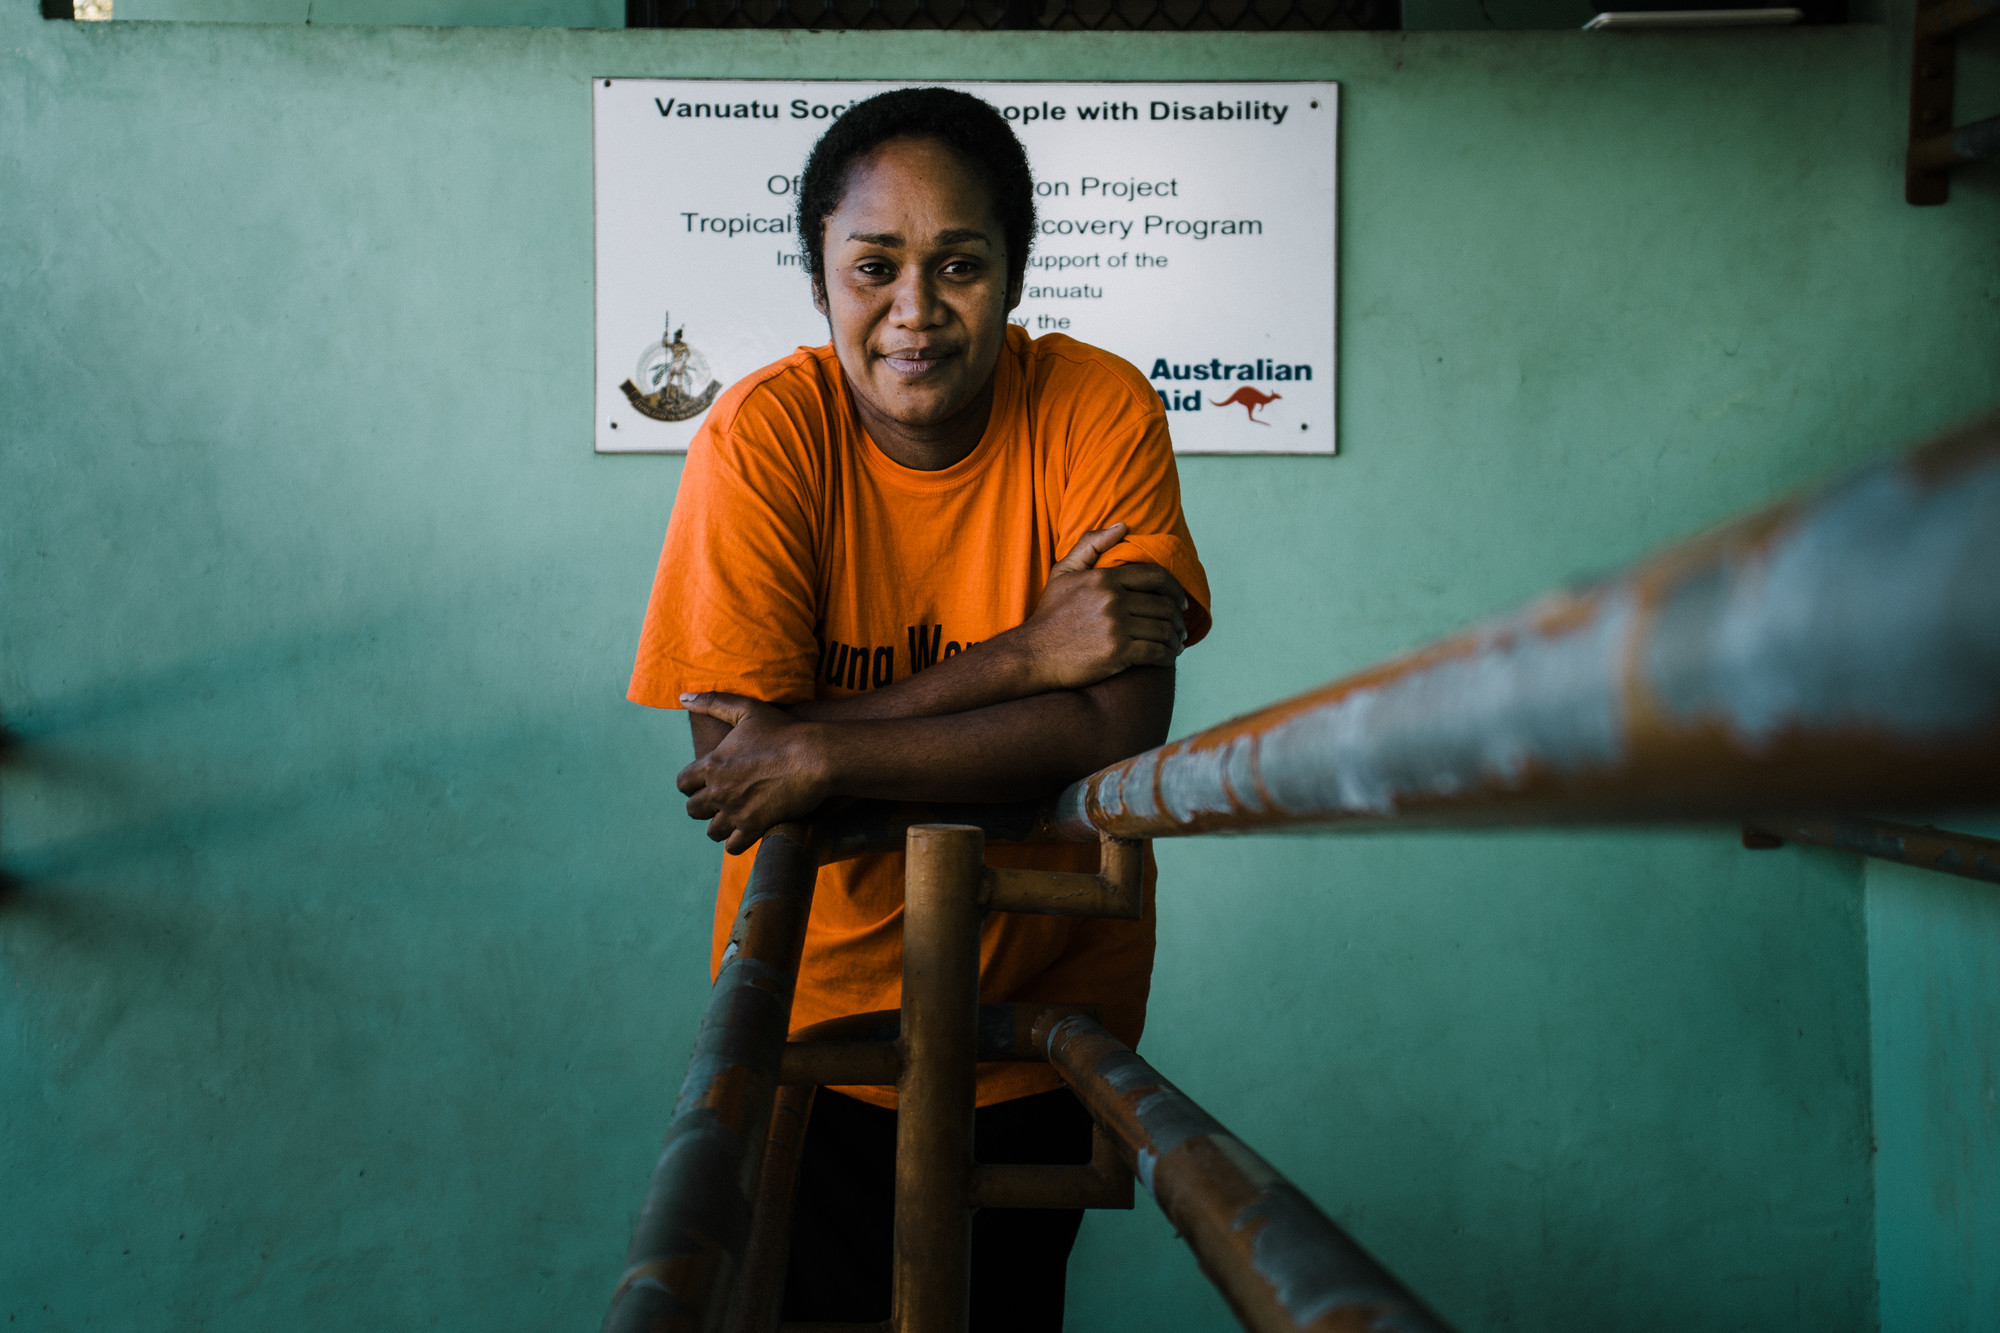 <p>Title:&nbsp;The Vanuatu Photo Project: Meet Talula &amp; Louisa&nbsp;</p>
<p>Summary:&nbsp;&quot;Include me, include all of us.&quot;&nbsp;</p>
<p>Author:&nbsp;By&nbsp;Talula, 2020-21 Young Women&#039;s Leadership Program graduate who manages the local business Eliane Passion Sewing and Designs&nbsp;</p>
<p>Link to story on care.org:&nbsp;&nbsp;<a href="https://www.care.org/news-and-stories/culture/the-vanuatu-photo-project-meet-talula-louisa/" rel="noreferrer noopener" target="_blank">https://www.care.org/news-and-stories/culture/the-vanuatu-photo-project-meet-talula-louisa/</a>&nbsp;</p>
<p>&nbsp;</p>
<p>Louisa, 30,&nbsp;grew up in the lovely settlement of&nbsp;Melemaat&nbsp;in Vanuatu with three brothers,&nbsp;and cousins&nbsp;who visited&nbsp;regularly.&nbsp;</p>
<p>For ten years, her mother was the caretaker of the Vanuatu Society for People with Disability,&nbsp;so while growing up,&nbsp;Louisa and her siblings&nbsp;interacted with many people&nbsp;who used the society&rsquo;s services. This sparked&nbsp;a&nbsp;desire&nbsp;in her&nbsp;to work with youth and children with&nbsp;disabilities.&nbsp;</p>
<p>For the&nbsp;past six years,&nbsp;Louisa&nbsp;has been the Housemaster at&nbsp;Onesua&nbsp;Presbyterian College.&nbsp;She explained,&nbsp;&ldquo;This job allows&nbsp;me to educate both boys and girls on how to take responsibility,&nbsp;look&nbsp;after their dorms, be on kitchen duty, help&nbsp;serve&nbsp;meals, wash their own clothes and participate in school activities.&rdquo; She&nbsp;also helps&nbsp;develop their&nbsp;public speaking&nbsp;skills to build confidence.&nbsp;&nbsp;</p>
<p>Through her work,&nbsp;Louisa&nbsp;realised&nbsp;she&nbsp;enjoys supporting and working with children&nbsp;with&nbsp;disabilities. She has&nbsp;observed&nbsp;how&nbsp;teachers handle&nbsp;children with disabilities in&nbsp;the classroom&nbsp;and reflected on incidents she has witnessed. Louisa&nbsp;shared a story about&nbsp;a young boy&nbsp;who&nbsp;was&nbsp;teased because of&nbsp;his disability,&nbsp;sometimes to the point where&nbsp;he&nbsp;would come home and tell his mother that he doesn&rsquo;t want to go to school anymore.&nbsp;Louisa&nbsp;is outraged by&nbsp;such unfair and mean-spirited&nbsp;treatment. She&nbsp;exclaimed,&nbsp;&ldquo;Where is the equality in that? Instead of helping him,&nbsp;they turned against him!&rdquo; She feels&nbsp;that discrimination is even worse between children of the same gender.&nbsp;Louisa&nbsp;spoke&nbsp;of&nbsp;an incident she witnessed&nbsp;involving&nbsp;a girl&nbsp;with a disability&nbsp;being physically harassed on a bus by a group of other girls.&nbsp;&ldquo;Where exactly is the love and equality in that?&rdquo; Louisa&nbsp;demanded.&nbsp;</p>
<p>As she was starting to&nbsp;recognise&nbsp;this&nbsp;interest in working with young people with disabilities, she heard about CARE&rsquo;s Young Women&rsquo;s Leadership Program&nbsp;(YWLP).&nbsp;Louisa&nbsp;was particularly interested in learning to better support women and girls with&nbsp;disabilities&nbsp;who&nbsp;face&nbsp;violence and discrimination&nbsp;because of their disability.&nbsp;&ldquo;Before, I was a leader but didn&rsquo;t know exactly what I was doing,&rdquo; she&nbsp;said.&nbsp;&nbsp;</p>
<p>She felt that throughout&nbsp;the YWLP,&nbsp;and especially after graduating in 2021,&nbsp;she had found her way from the darkness into the light. The program has&nbsp;empowered and&nbsp;supported her in becoming who she aspires to be and is&nbsp;inspiring others to become the best versions&nbsp;of themselves.&nbsp;&nbsp;</p>
<p>Regardless of the obstacles,&nbsp;achieving&nbsp;gender equality within the disability community is&nbsp;essential&nbsp;to&nbsp;combatting&nbsp;violence against&nbsp;all&nbsp;women and girls. Louisa stands by this&nbsp;Bislama&nbsp;mantra,&nbsp;&ldquo;Inkludim&nbsp;mi,&nbsp;mo&nbsp;inkludim&nbsp;yumi&nbsp;everiwan&rdquo; which&nbsp;translates to&nbsp;&ldquo;Include me, and include all of us.&rdquo;&nbsp;A&nbsp;reminder that we all count and that should always lead the way.&nbsp;&nbsp;</p>
<p>The Vanuatu Young Women&#039;s Leadership Program (YWLP) is implemented by CARE in Vanuatu with the generous support of the AustralianGovernment. The YWLP is a12-month program which promotes the leadership of young women so they can take action to promote gender equality and eliminate violence against women and young girls in Vanuatu. Over&nbsp;eighty&nbsp;young women aged 18 to 30, including women with disabilities and diverse gender identities, have graduated from the program since it started in 2017. These graduates are now using the knowledge, skills and confidence strengthened through the YWLP to&nbsp;realise&nbsp;gender equality in their families, communities and across Vanuatu. All the young women featured in these stories, and&nbsp;those who captured their photographs and stories,&nbsp;are YWLP graduates.&nbsp;</p>